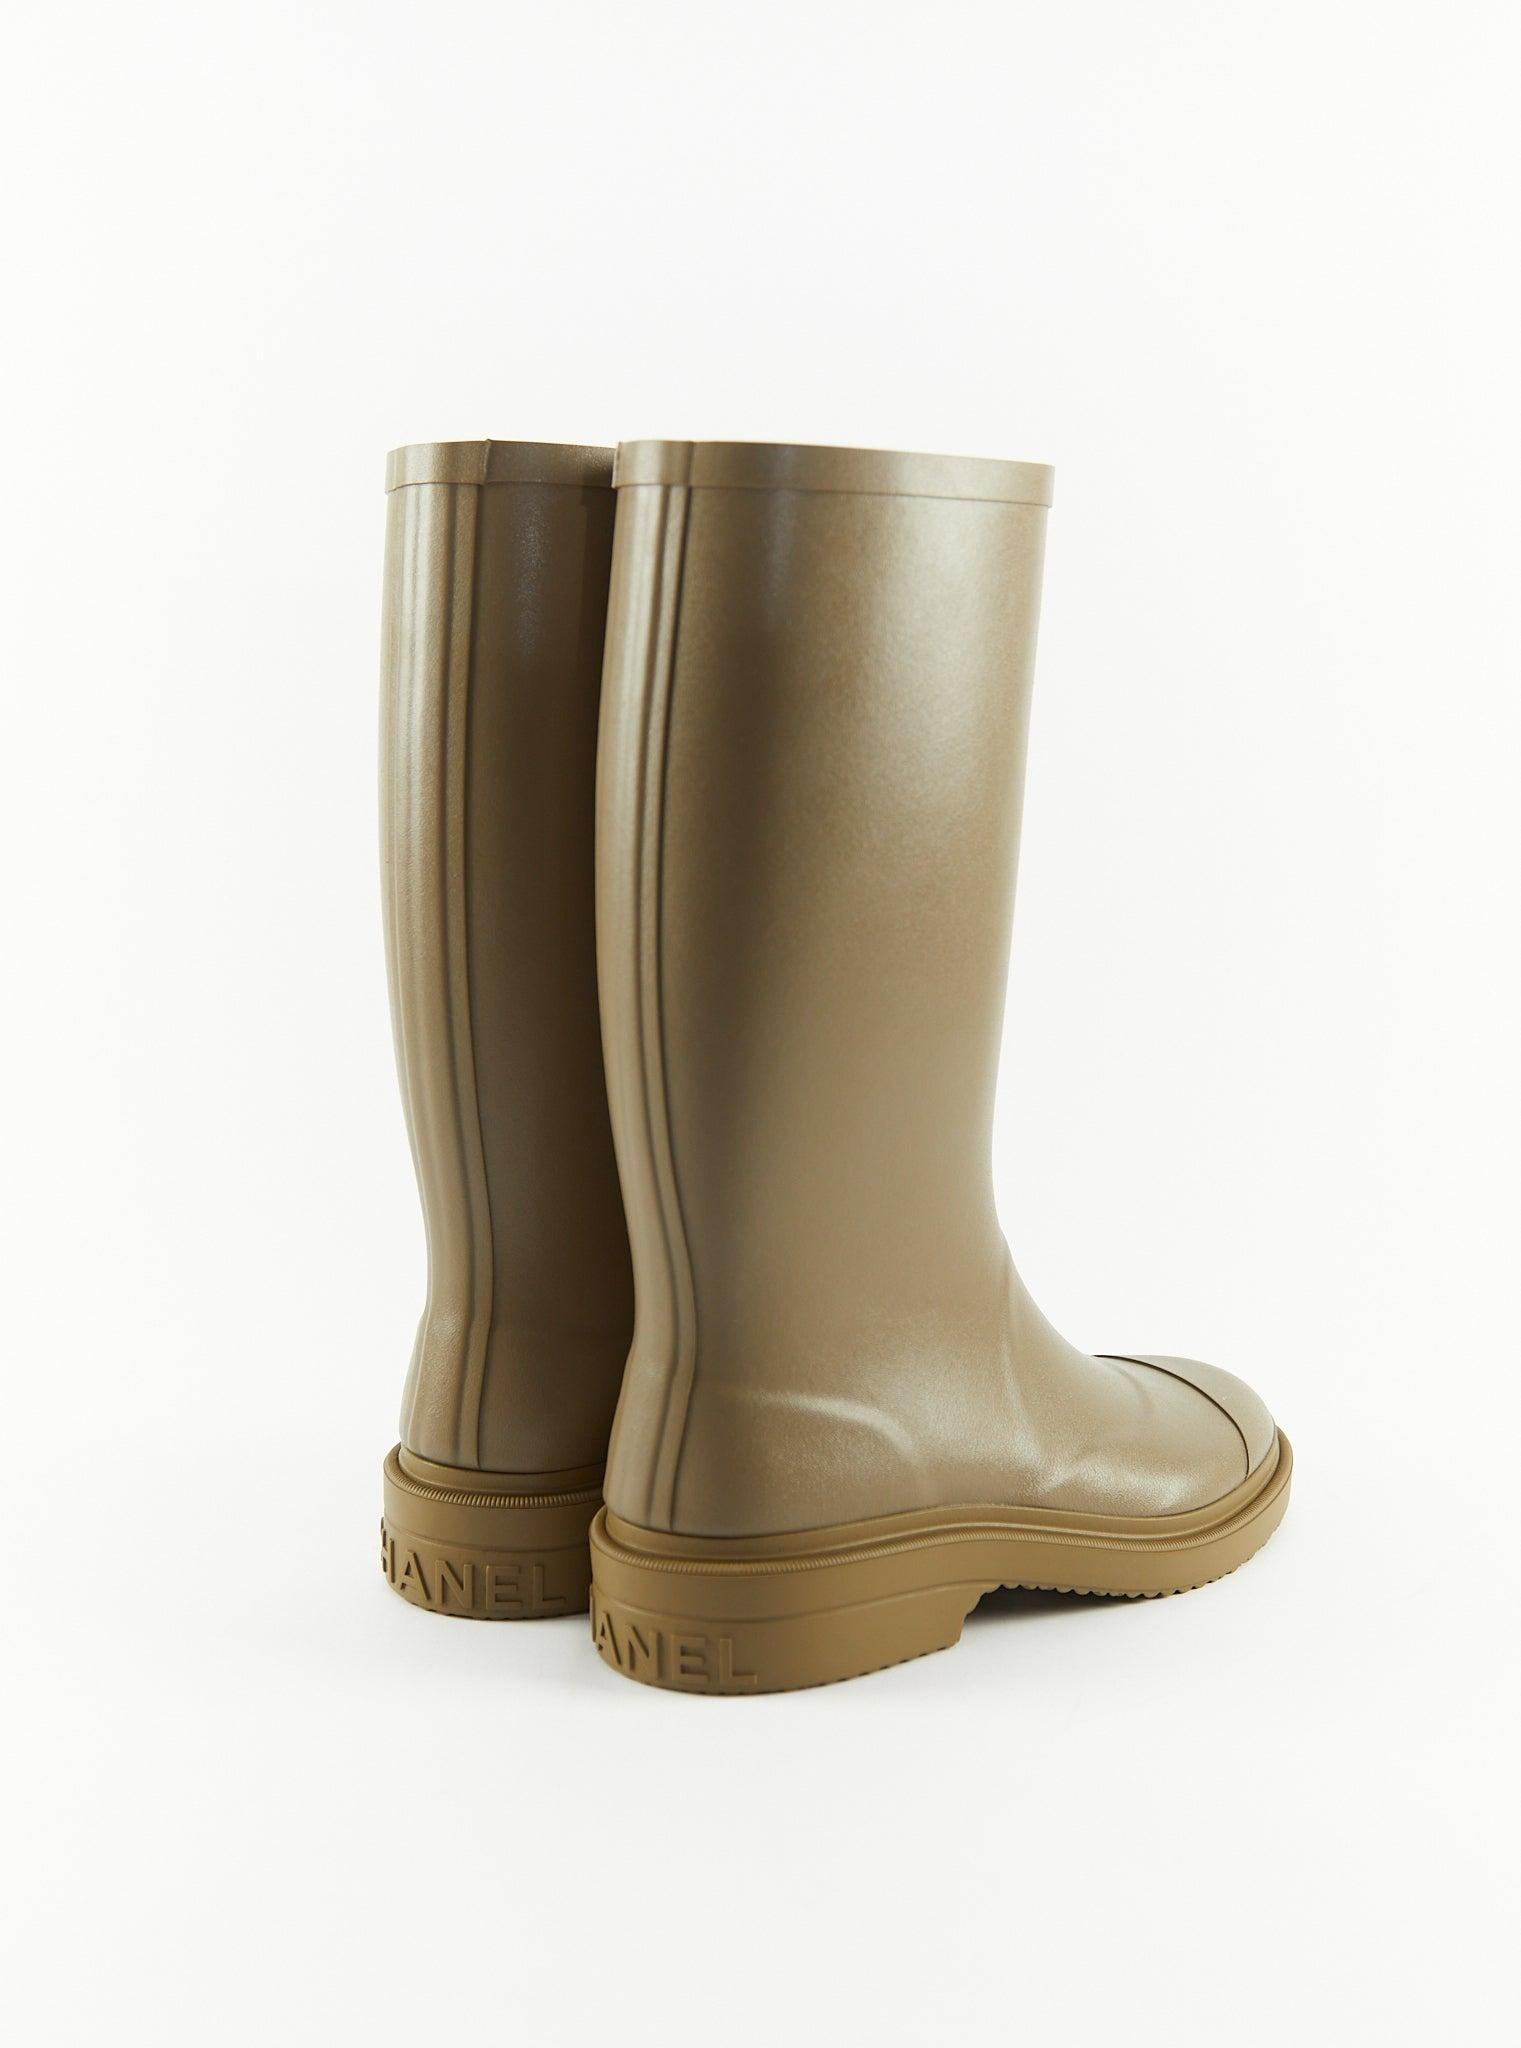 CHANEL WELLIES Khaki - Size 39 In Excellent Condition For Sale In London, GB